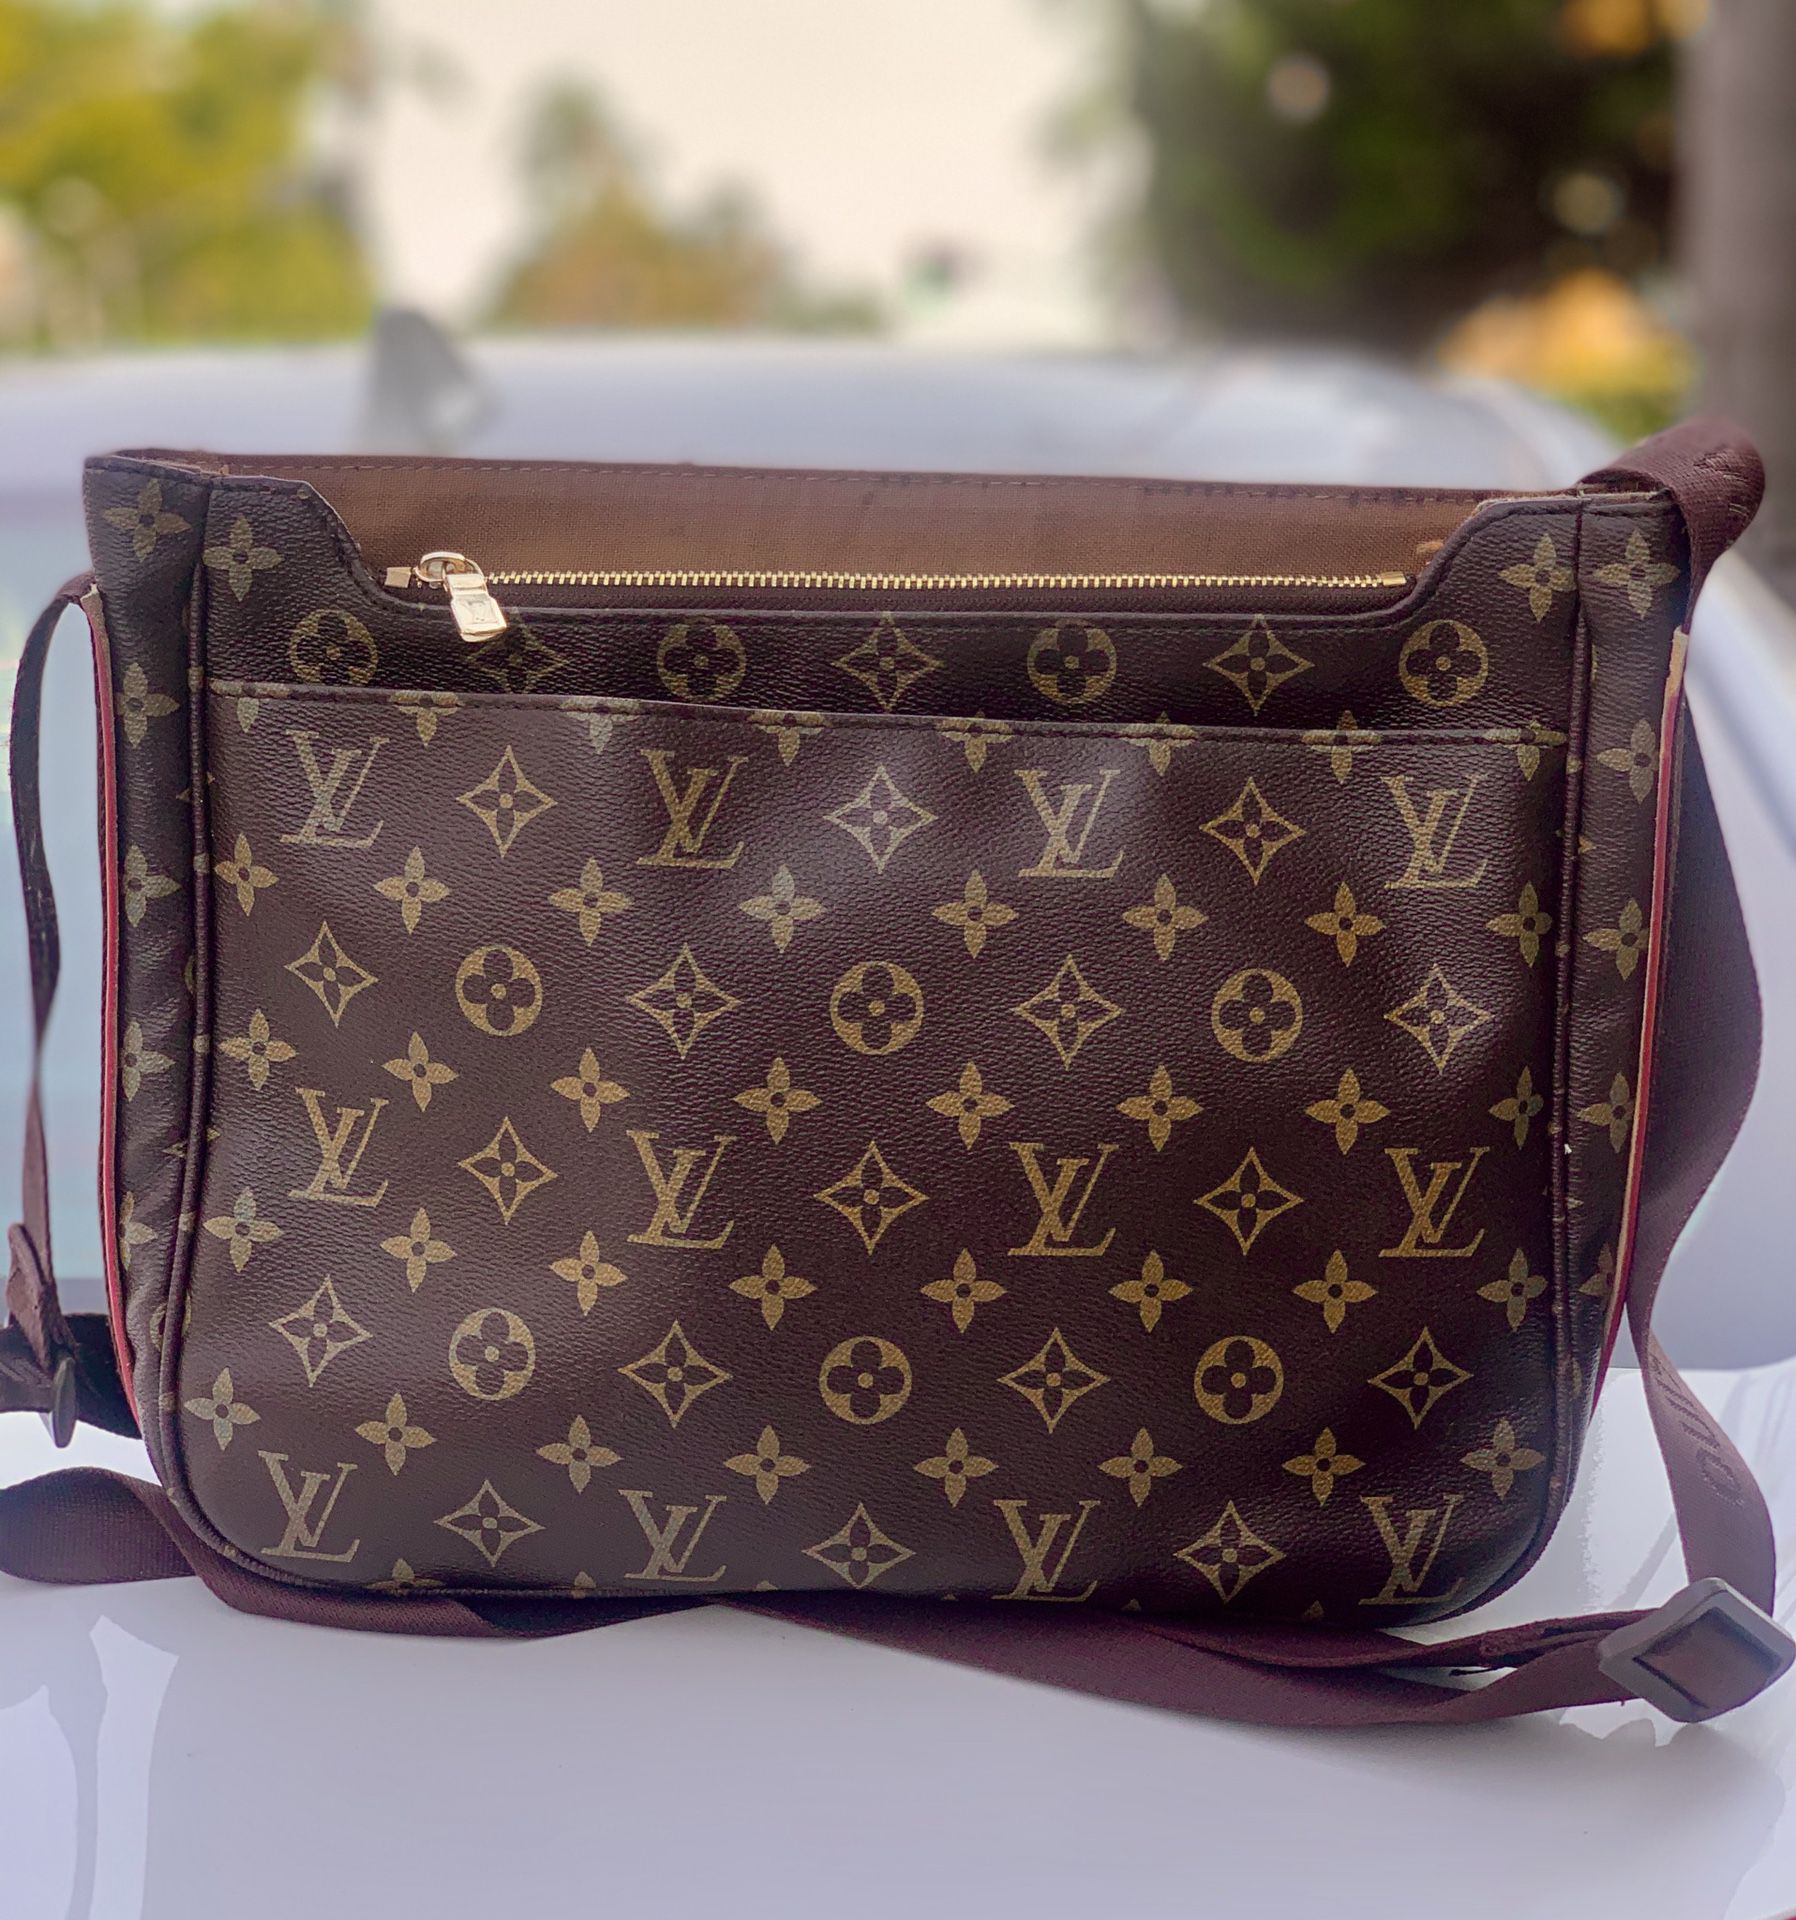 GENUINE Louis Vuitton messenger bag - from 2008 - great shape